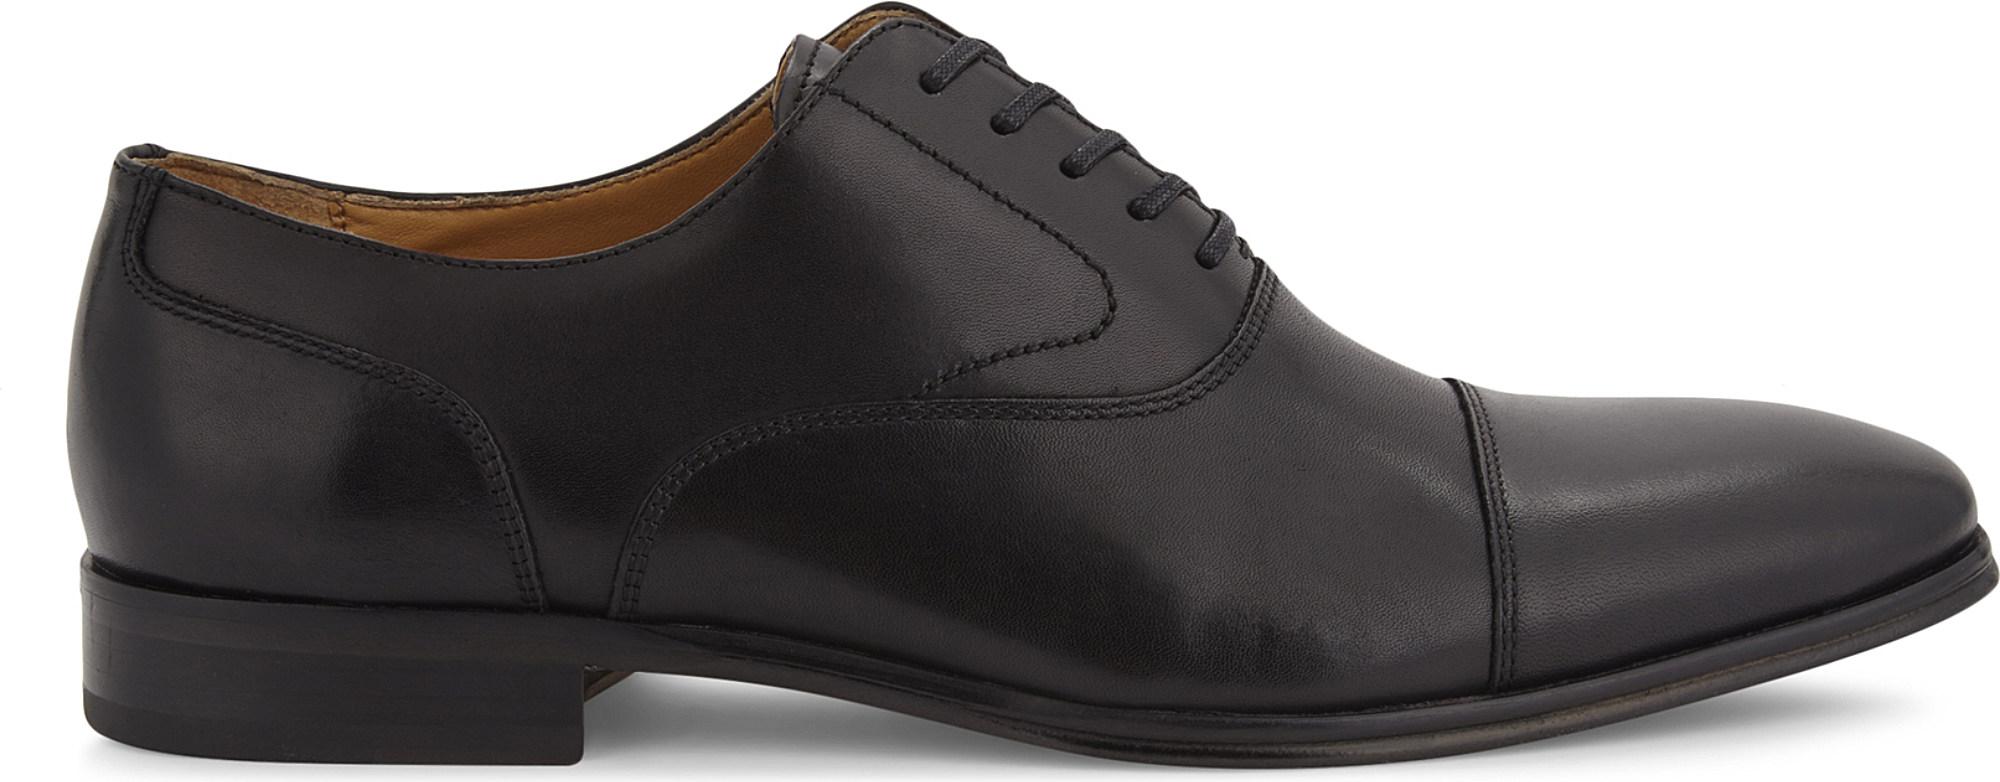  ALDO  Gregory Leather Oxford  Shoes  in Black for Men Lyst